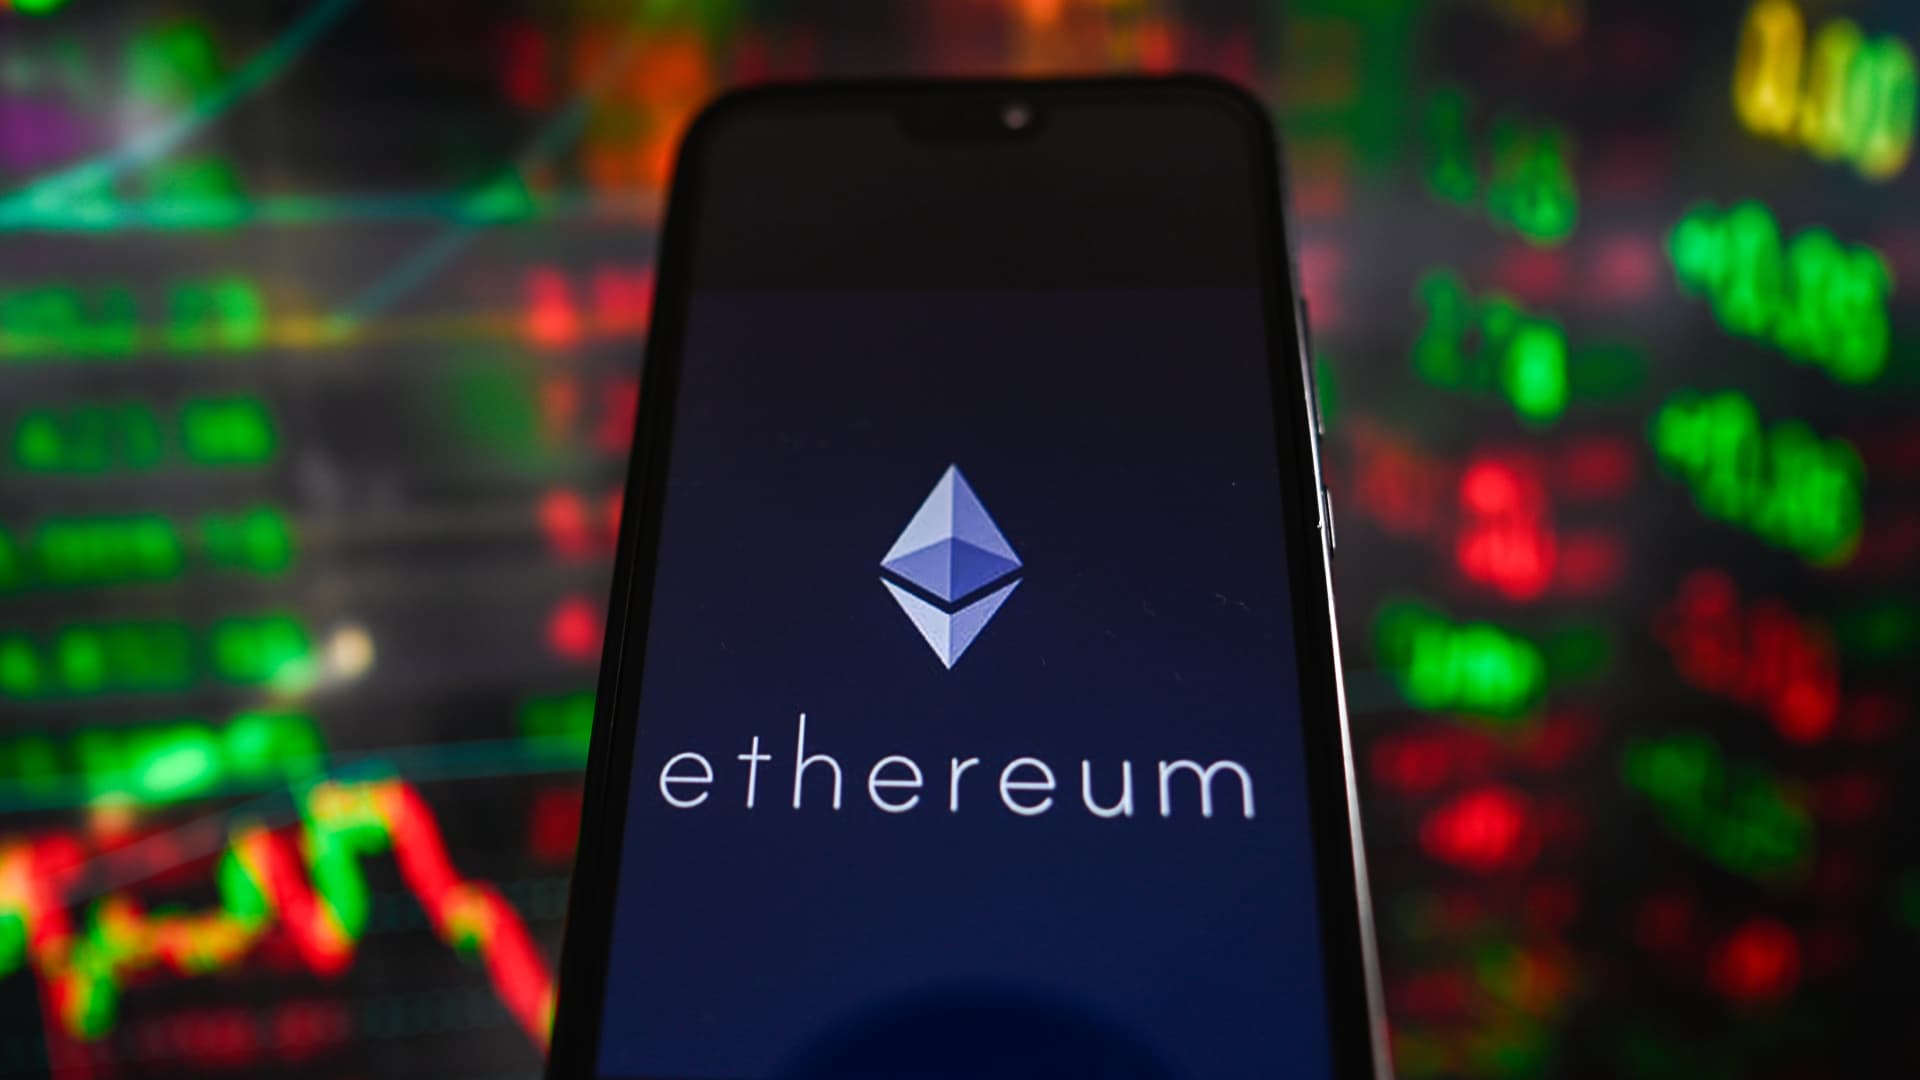 Ether extends gains, bitcoin slides after hitting a new record